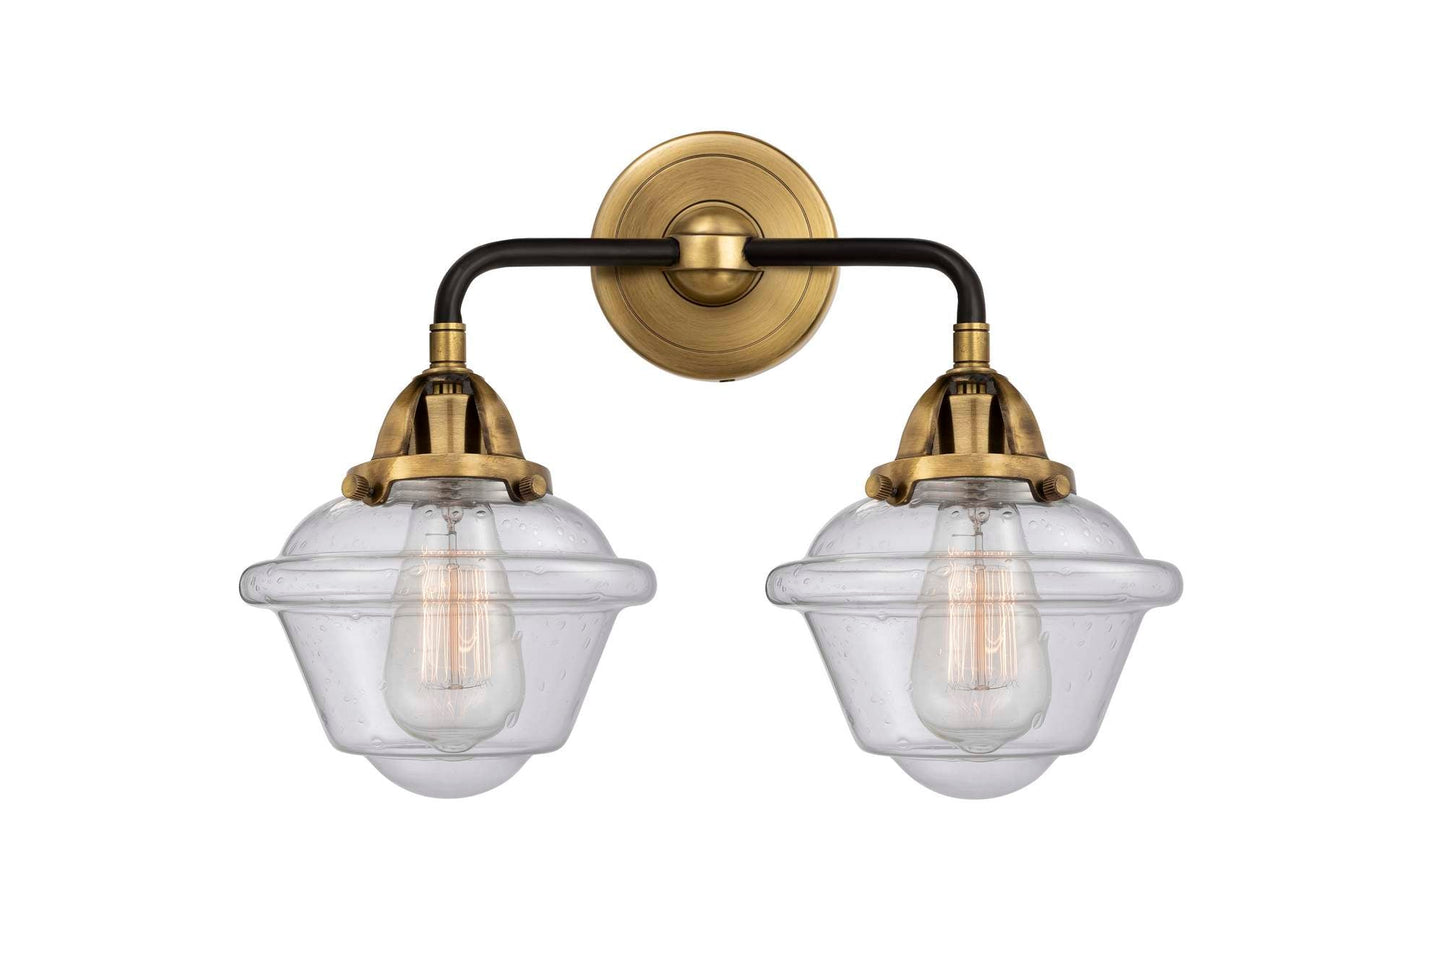 288-2W-BAB-G534 2-Light 15.5" Black Antique Brass Bath Vanity Light - Seedy Small Oxford Glass - LED Bulb - Dimmensions: 15.5 x 8 x 12.125 - Glass Up or Down: Yes